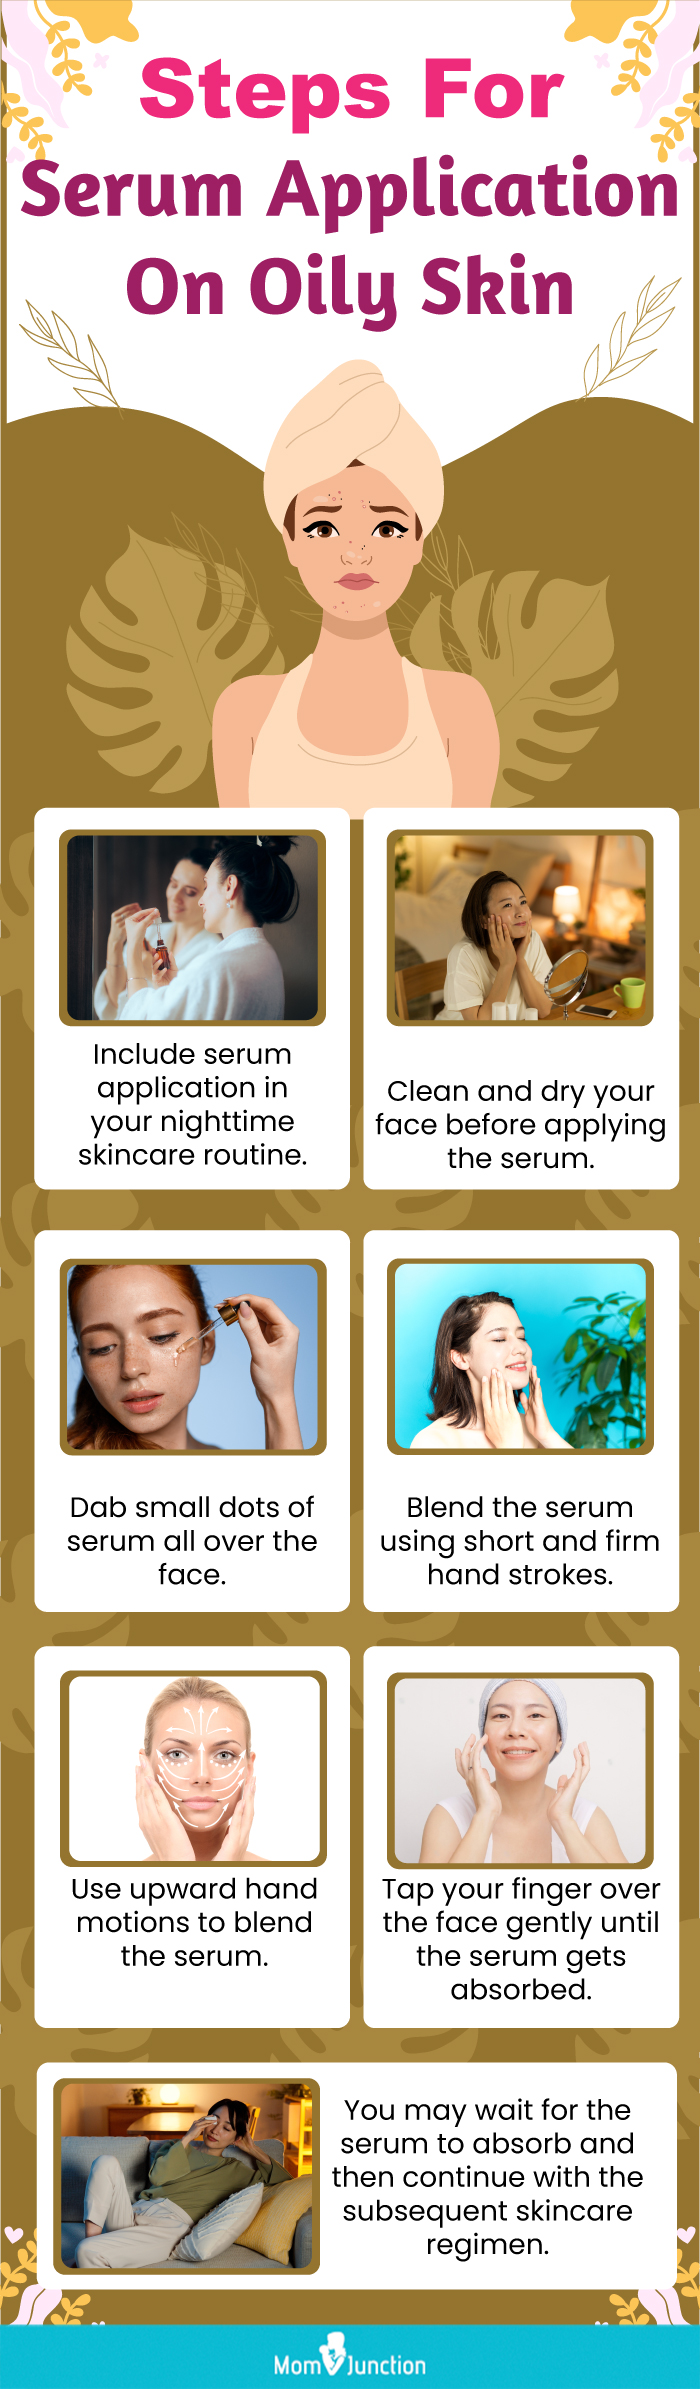 Steps For Serum Application On Oily Skin (infographic)